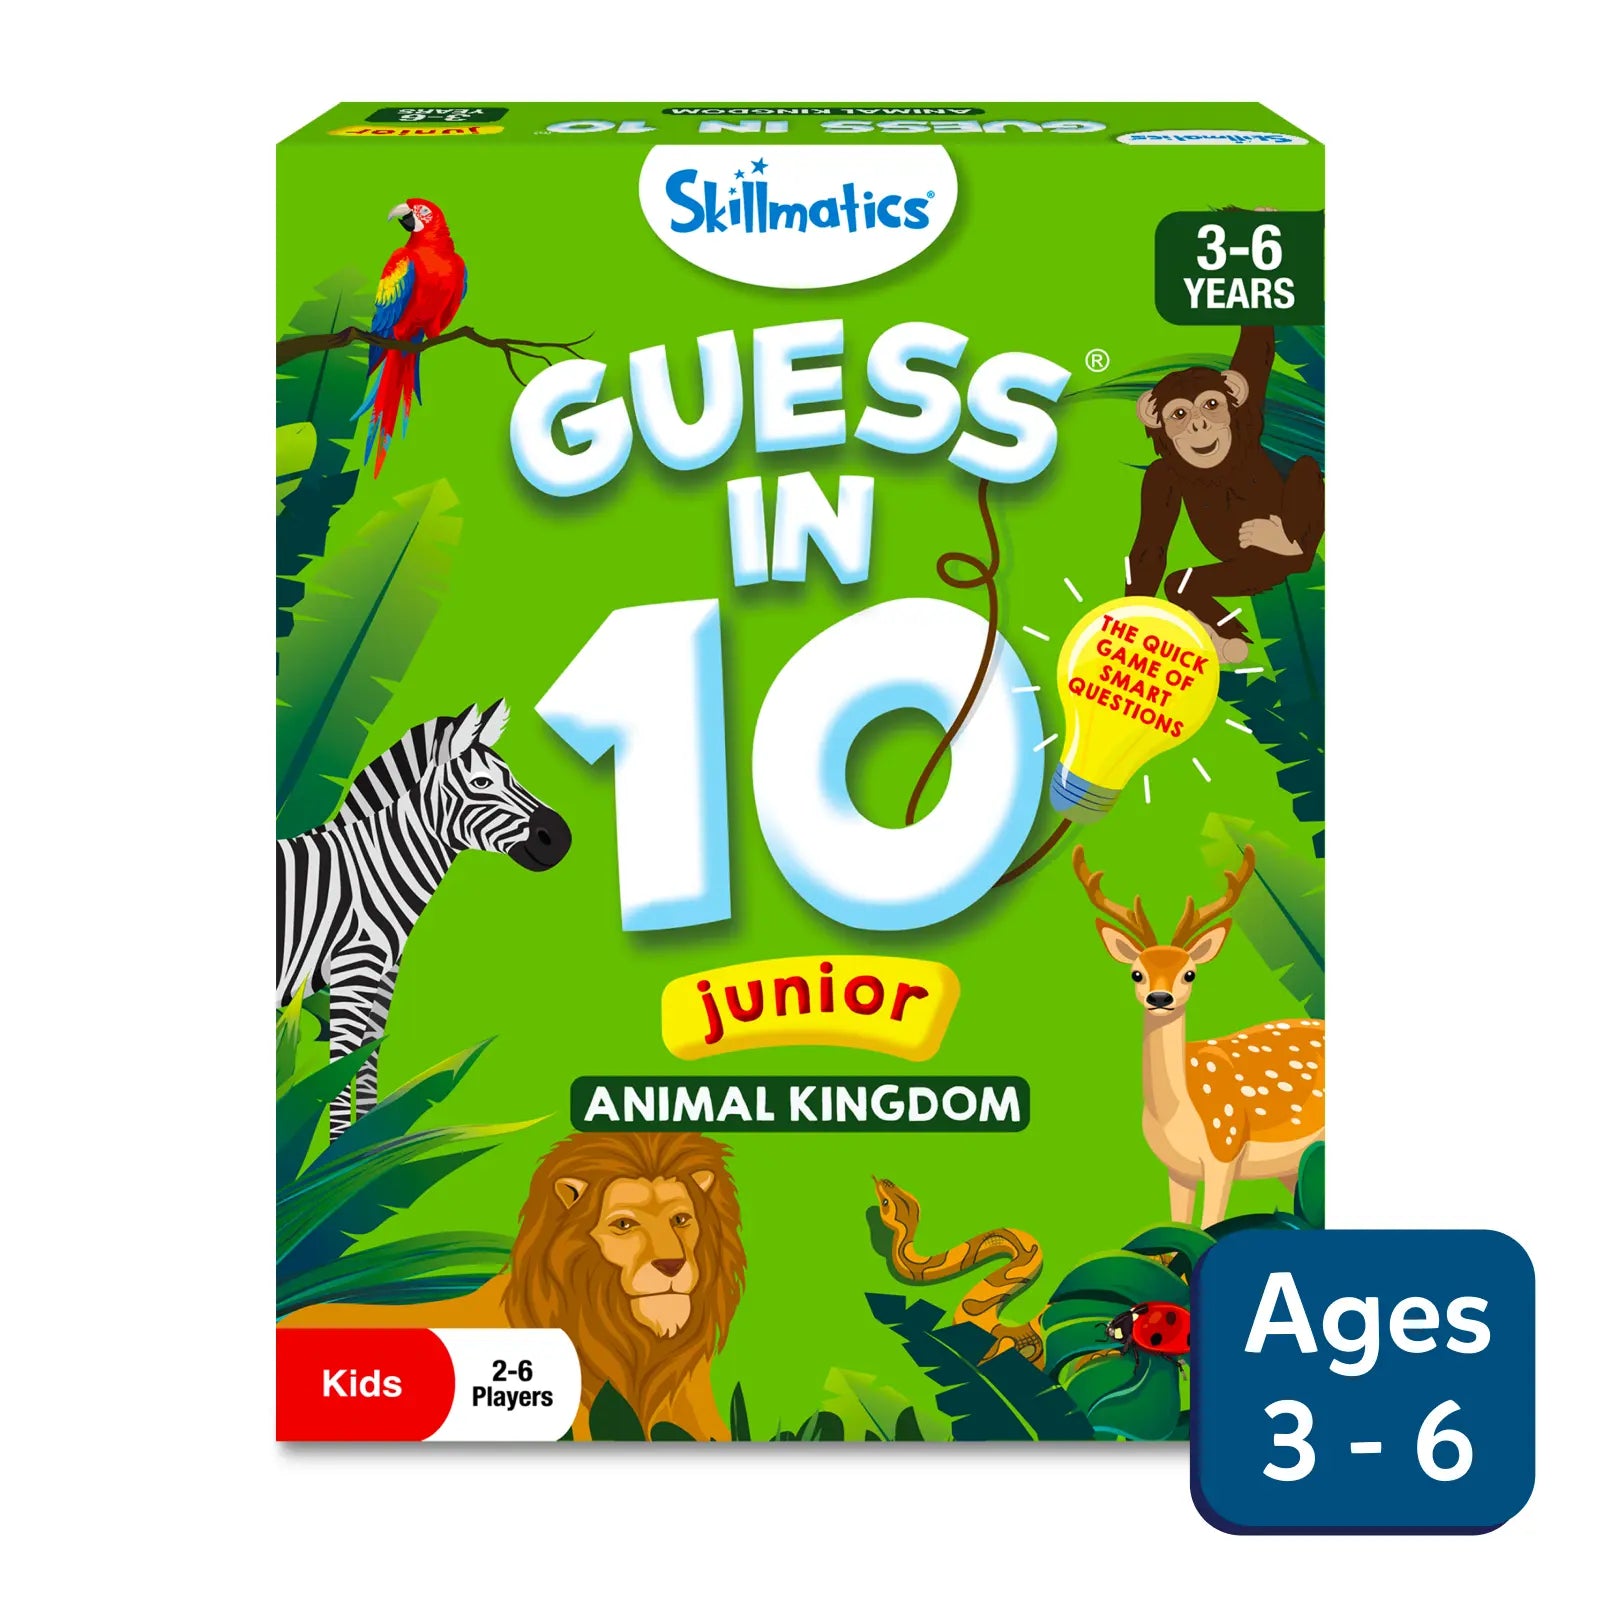 Guess in 10: Marvel  Trivia card game – MONSTER KIDS